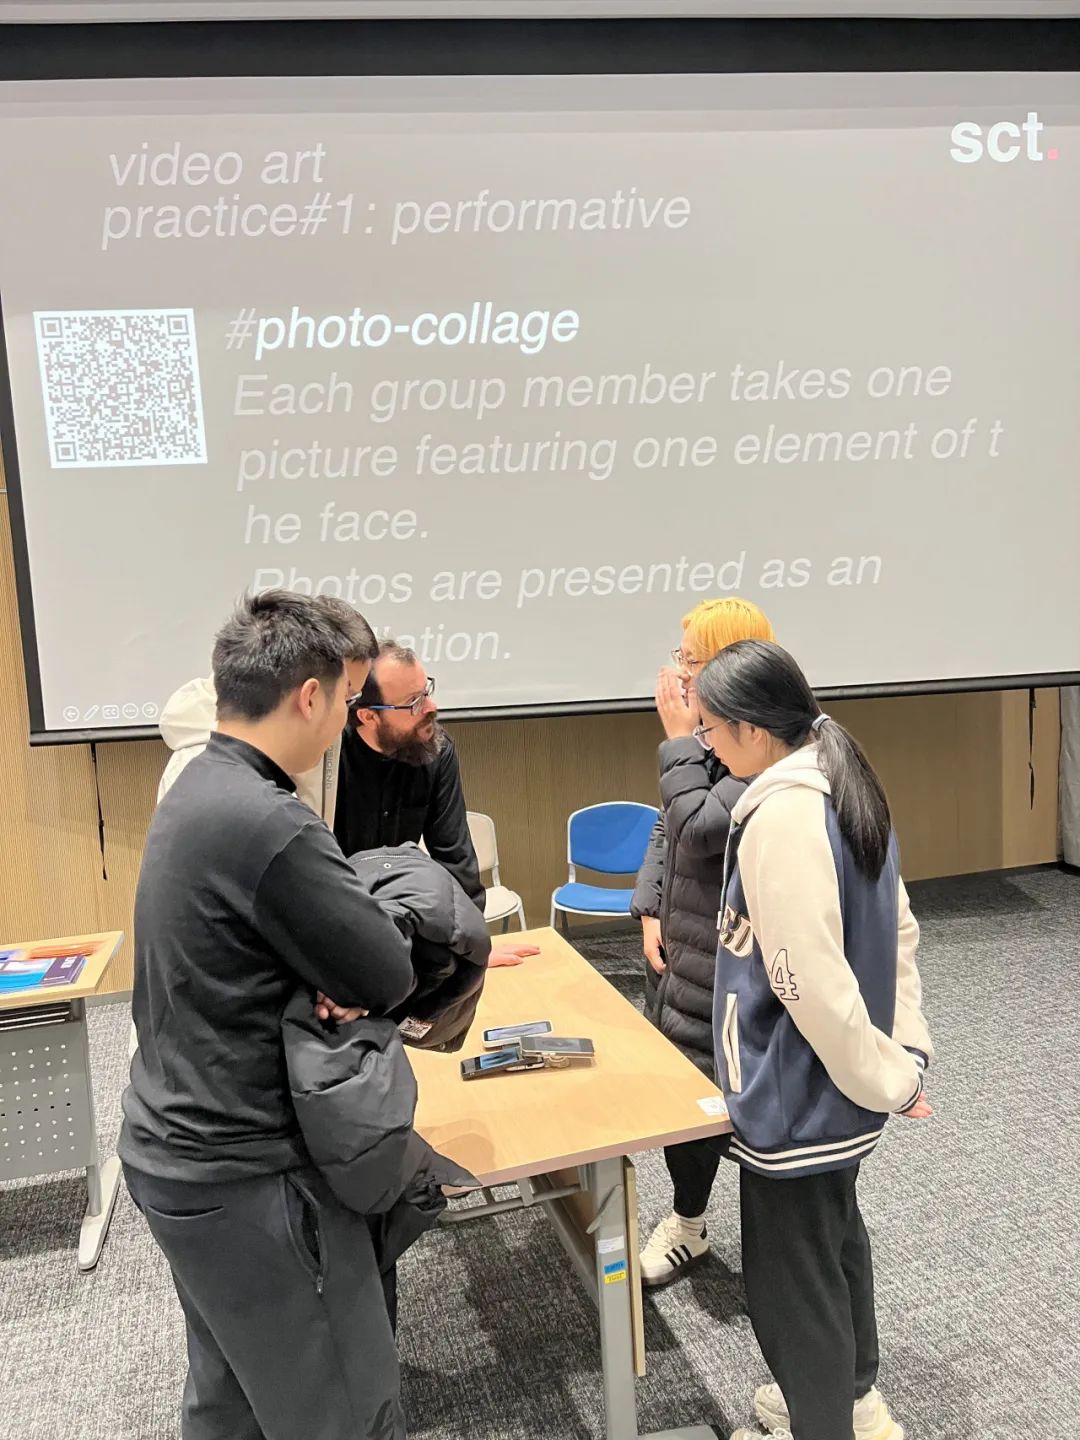 【Event Review】Workshops by the School of Cultural Technology